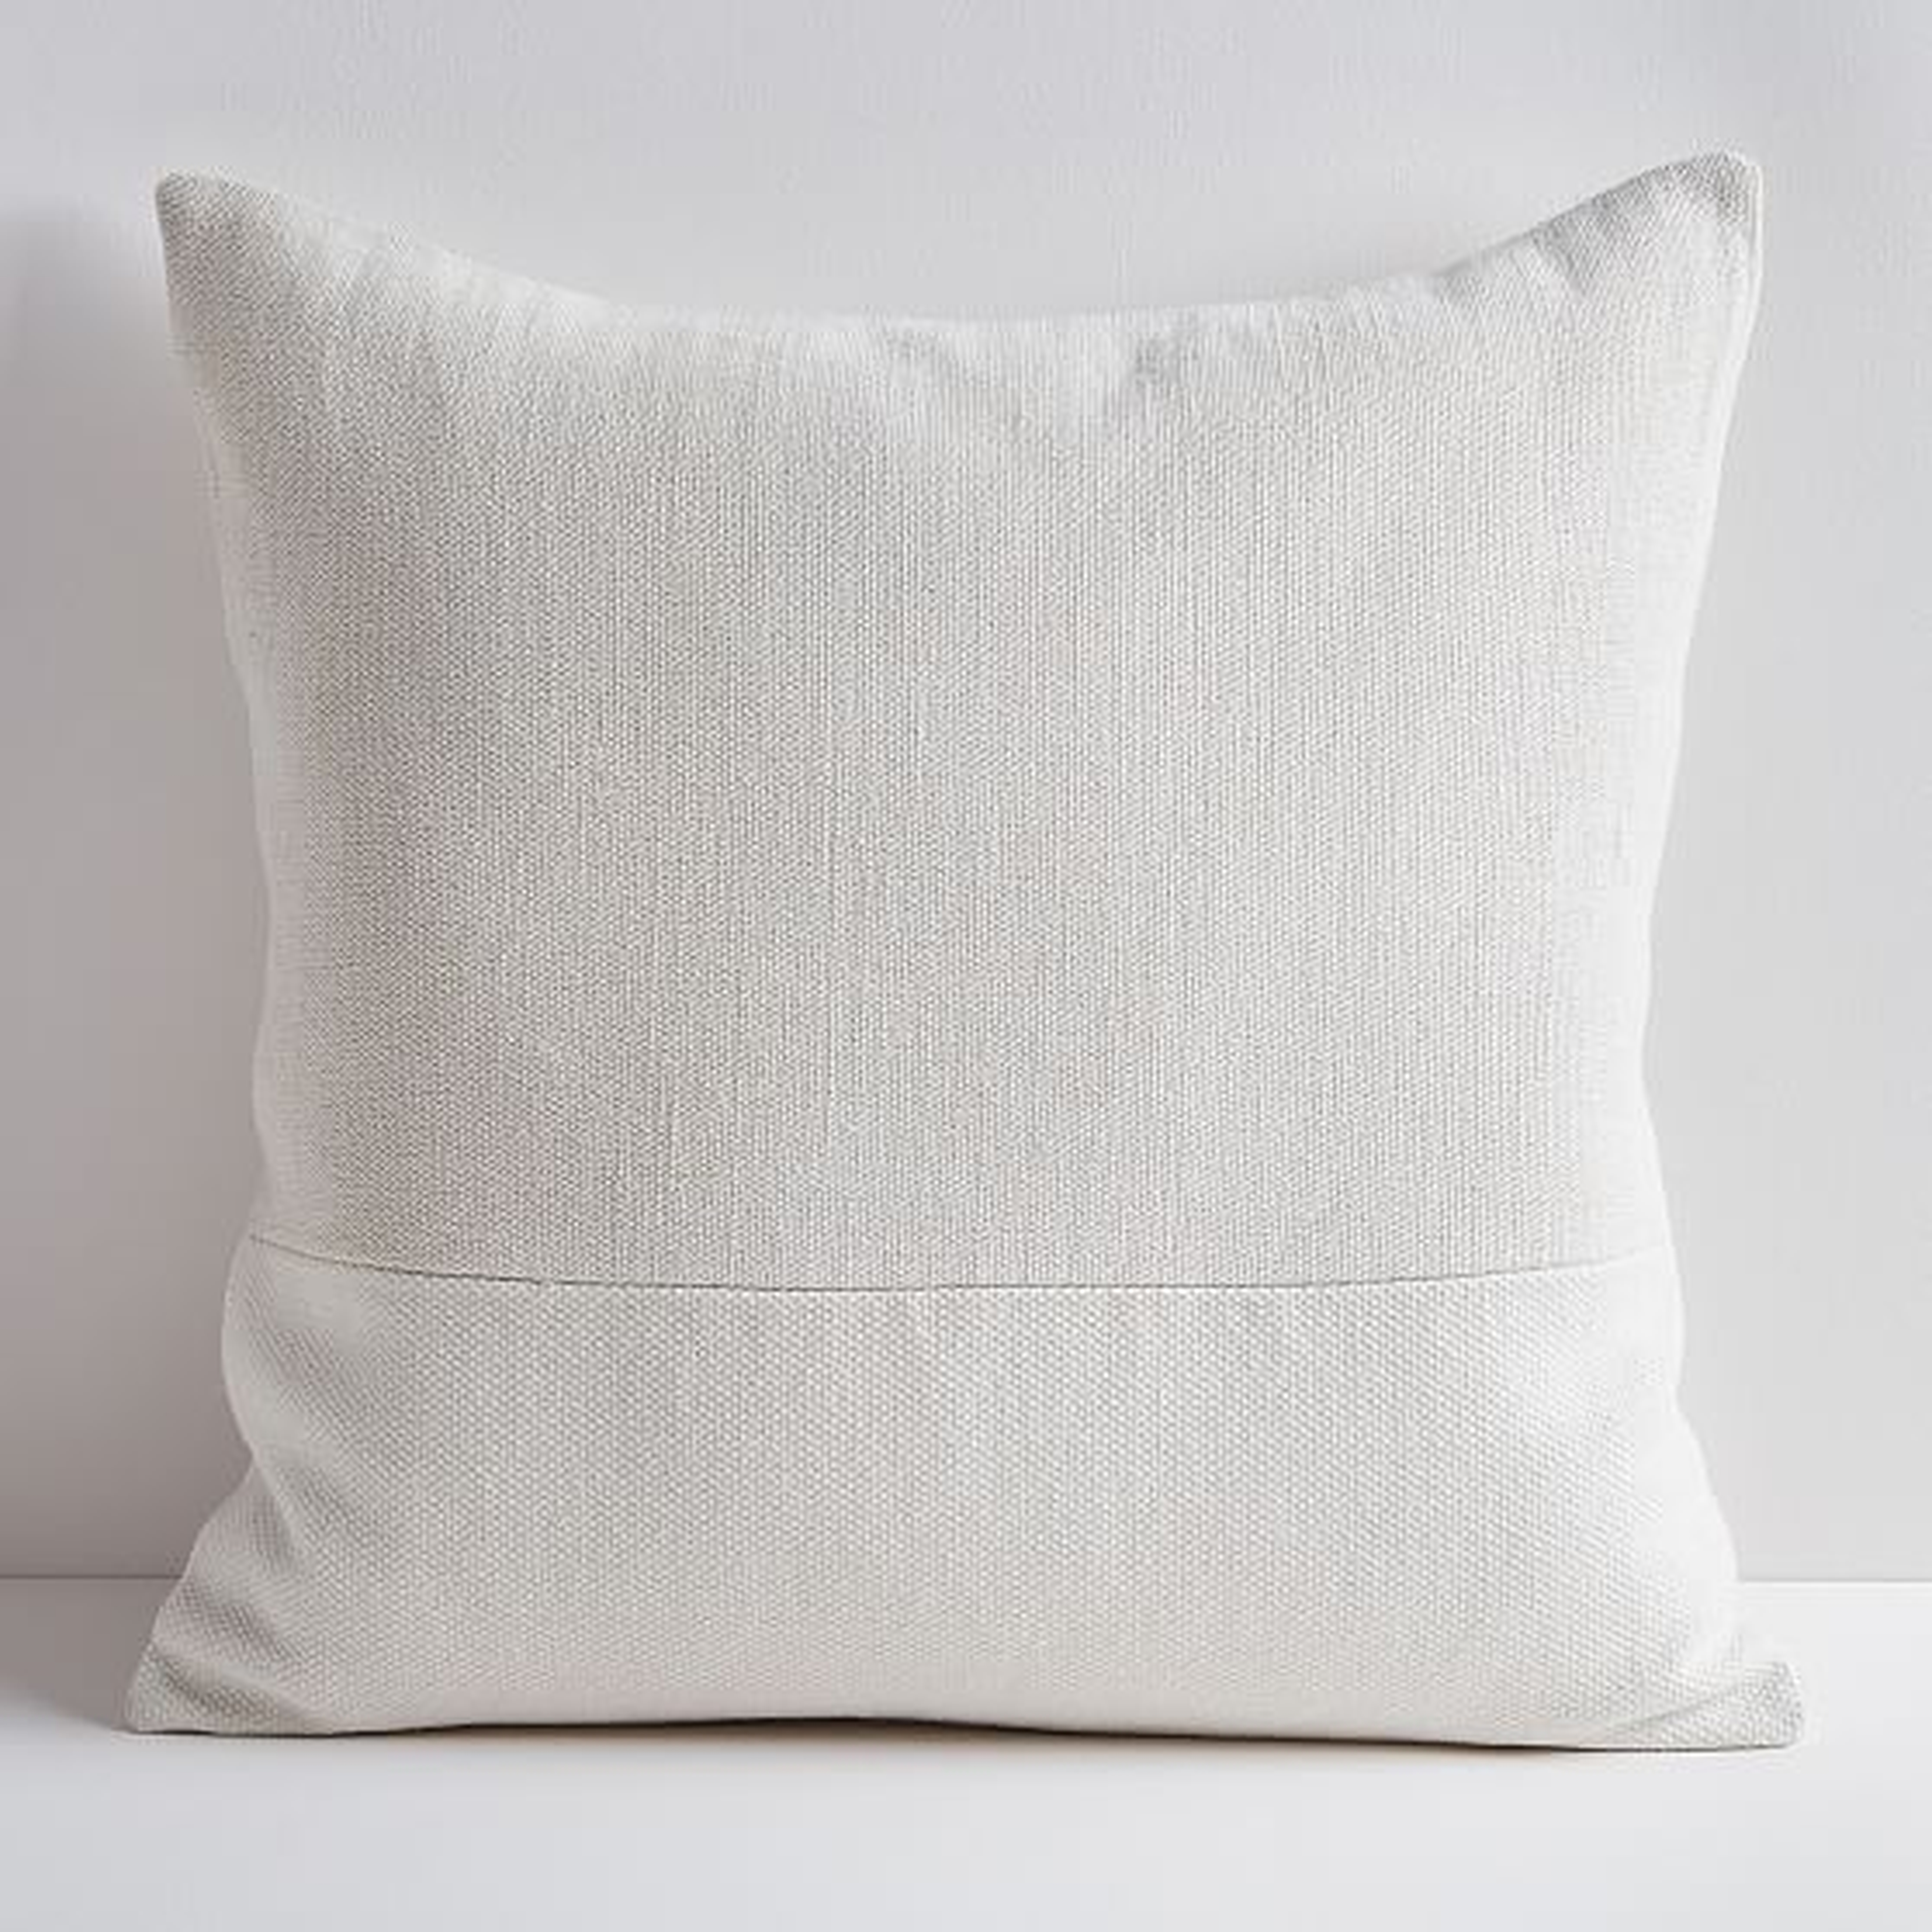 Cotton Canvas Pillow Cover with Down Insert, Stone White, 24"x24" - West Elm